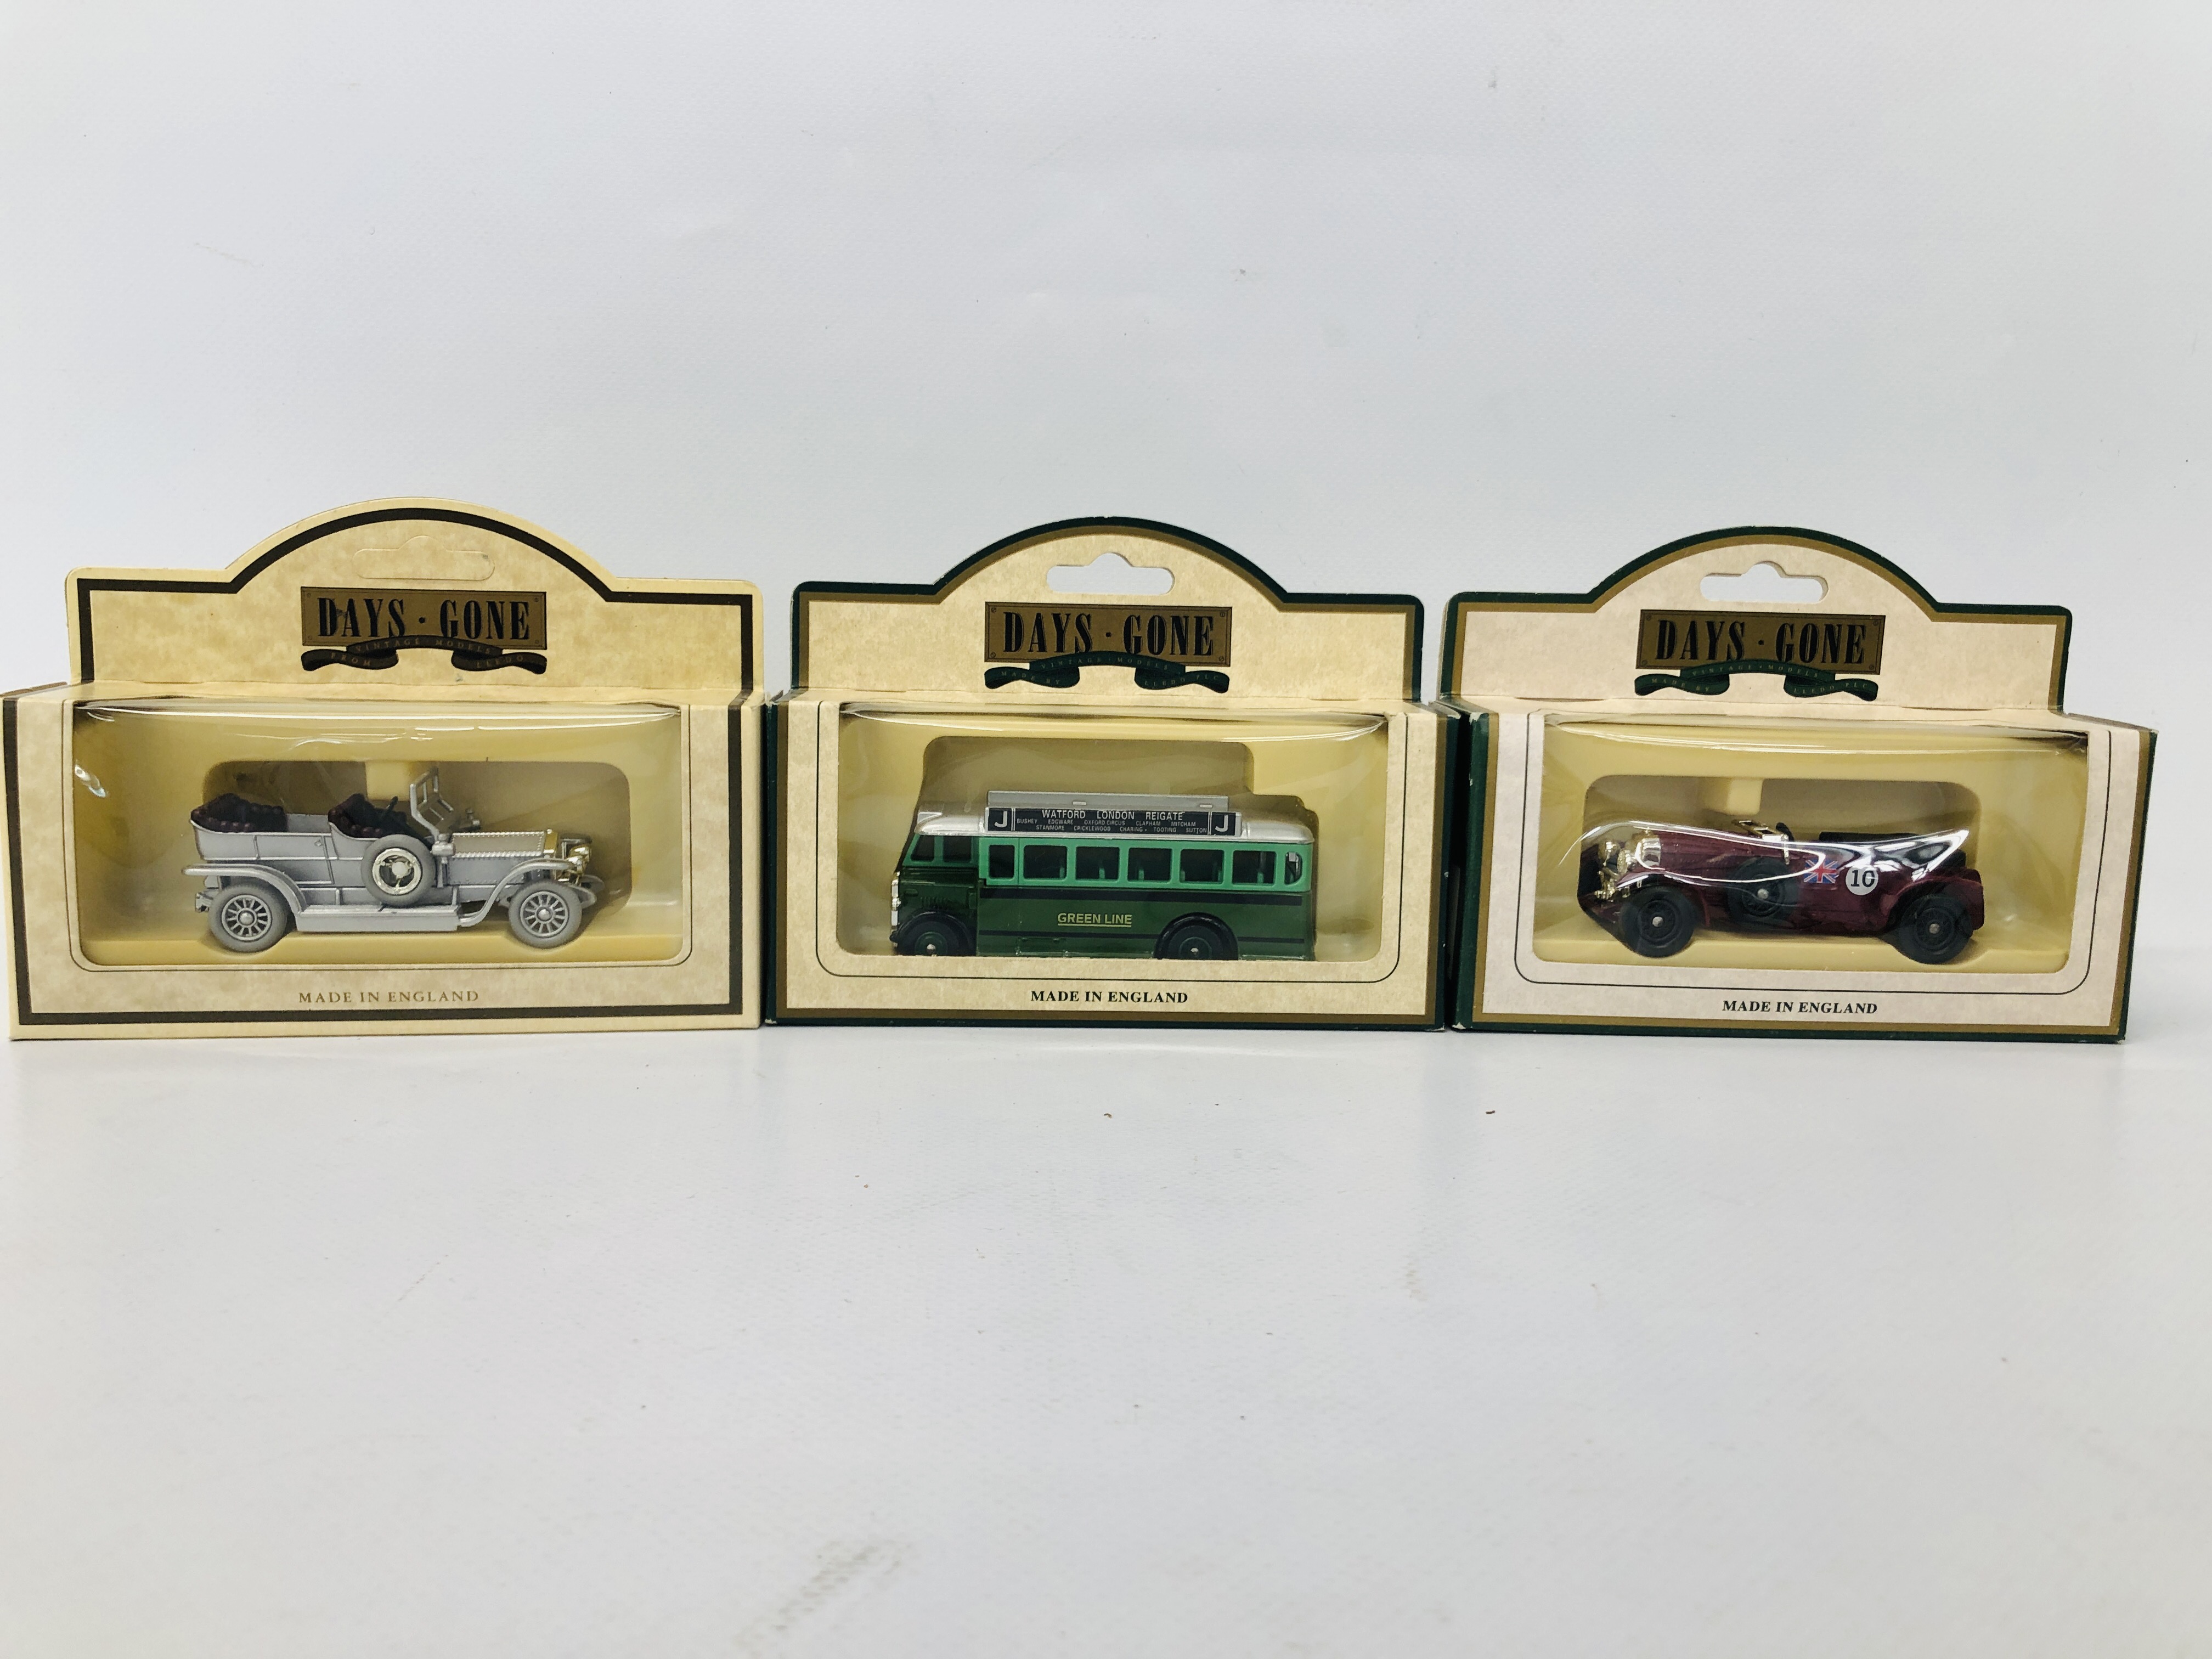 COLLECTION OF DAYS GONE COLLECTORS DIE-CAST MODEL VEHICLES IN ORIGINAL BOXES - Image 3 of 10